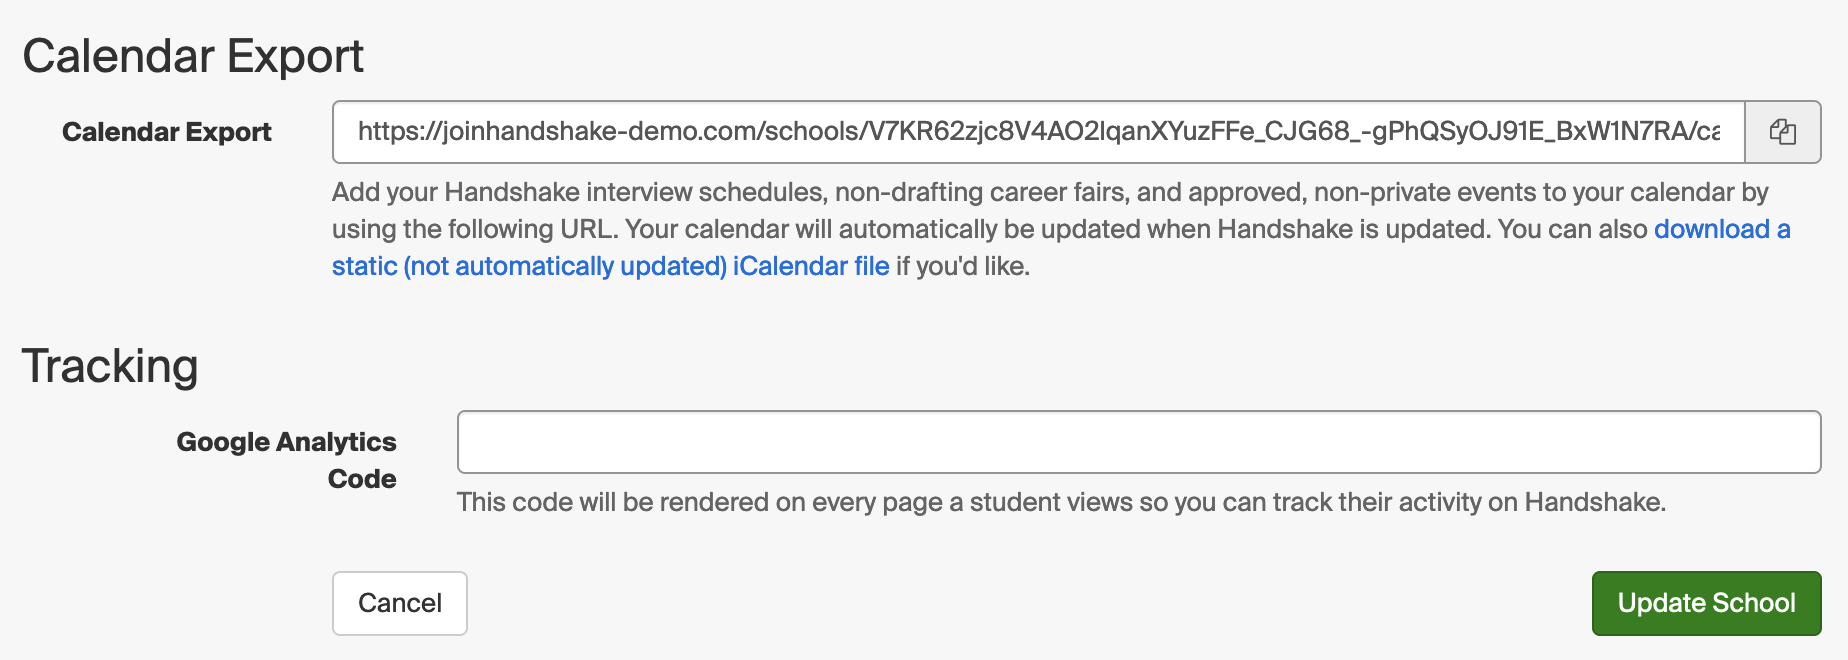 School_Settings_Calendar_Export_and_Tracking.png